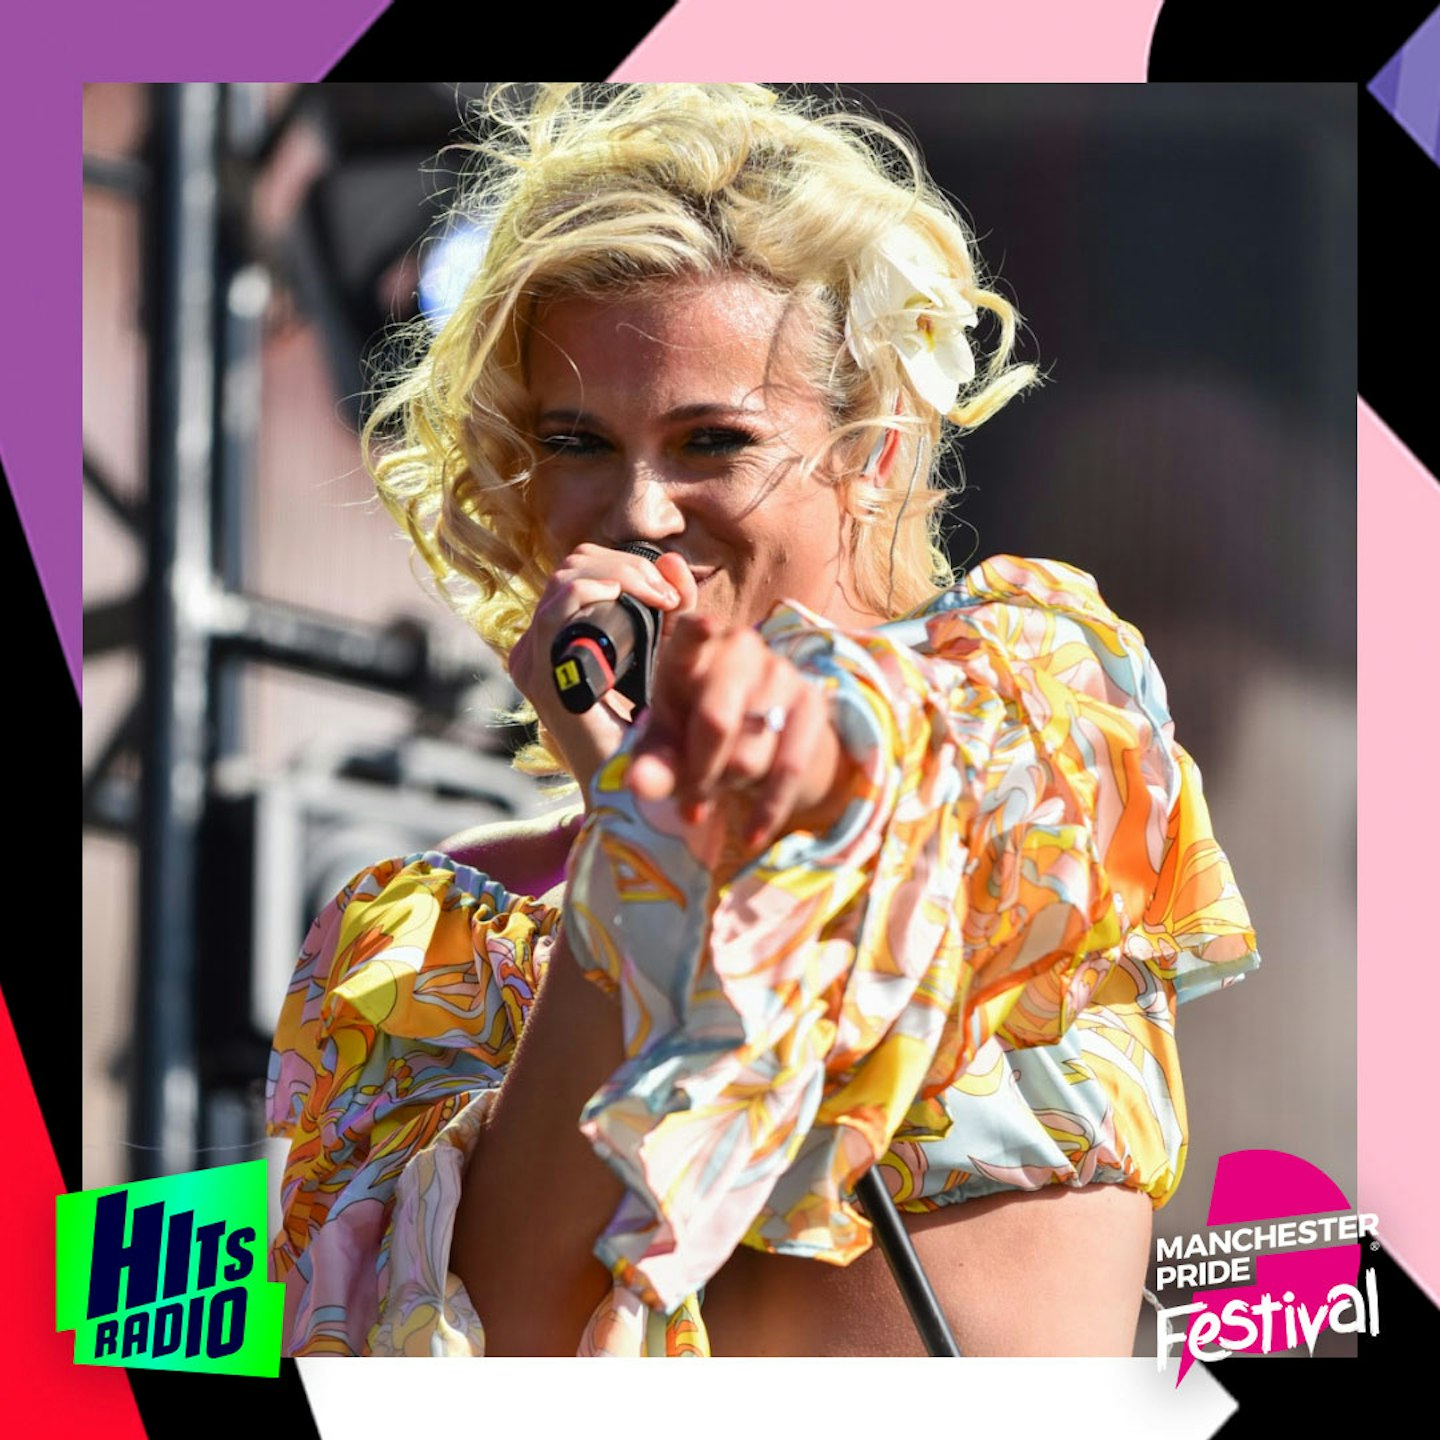 Pixie Lott performing at Manchester Pride 2019